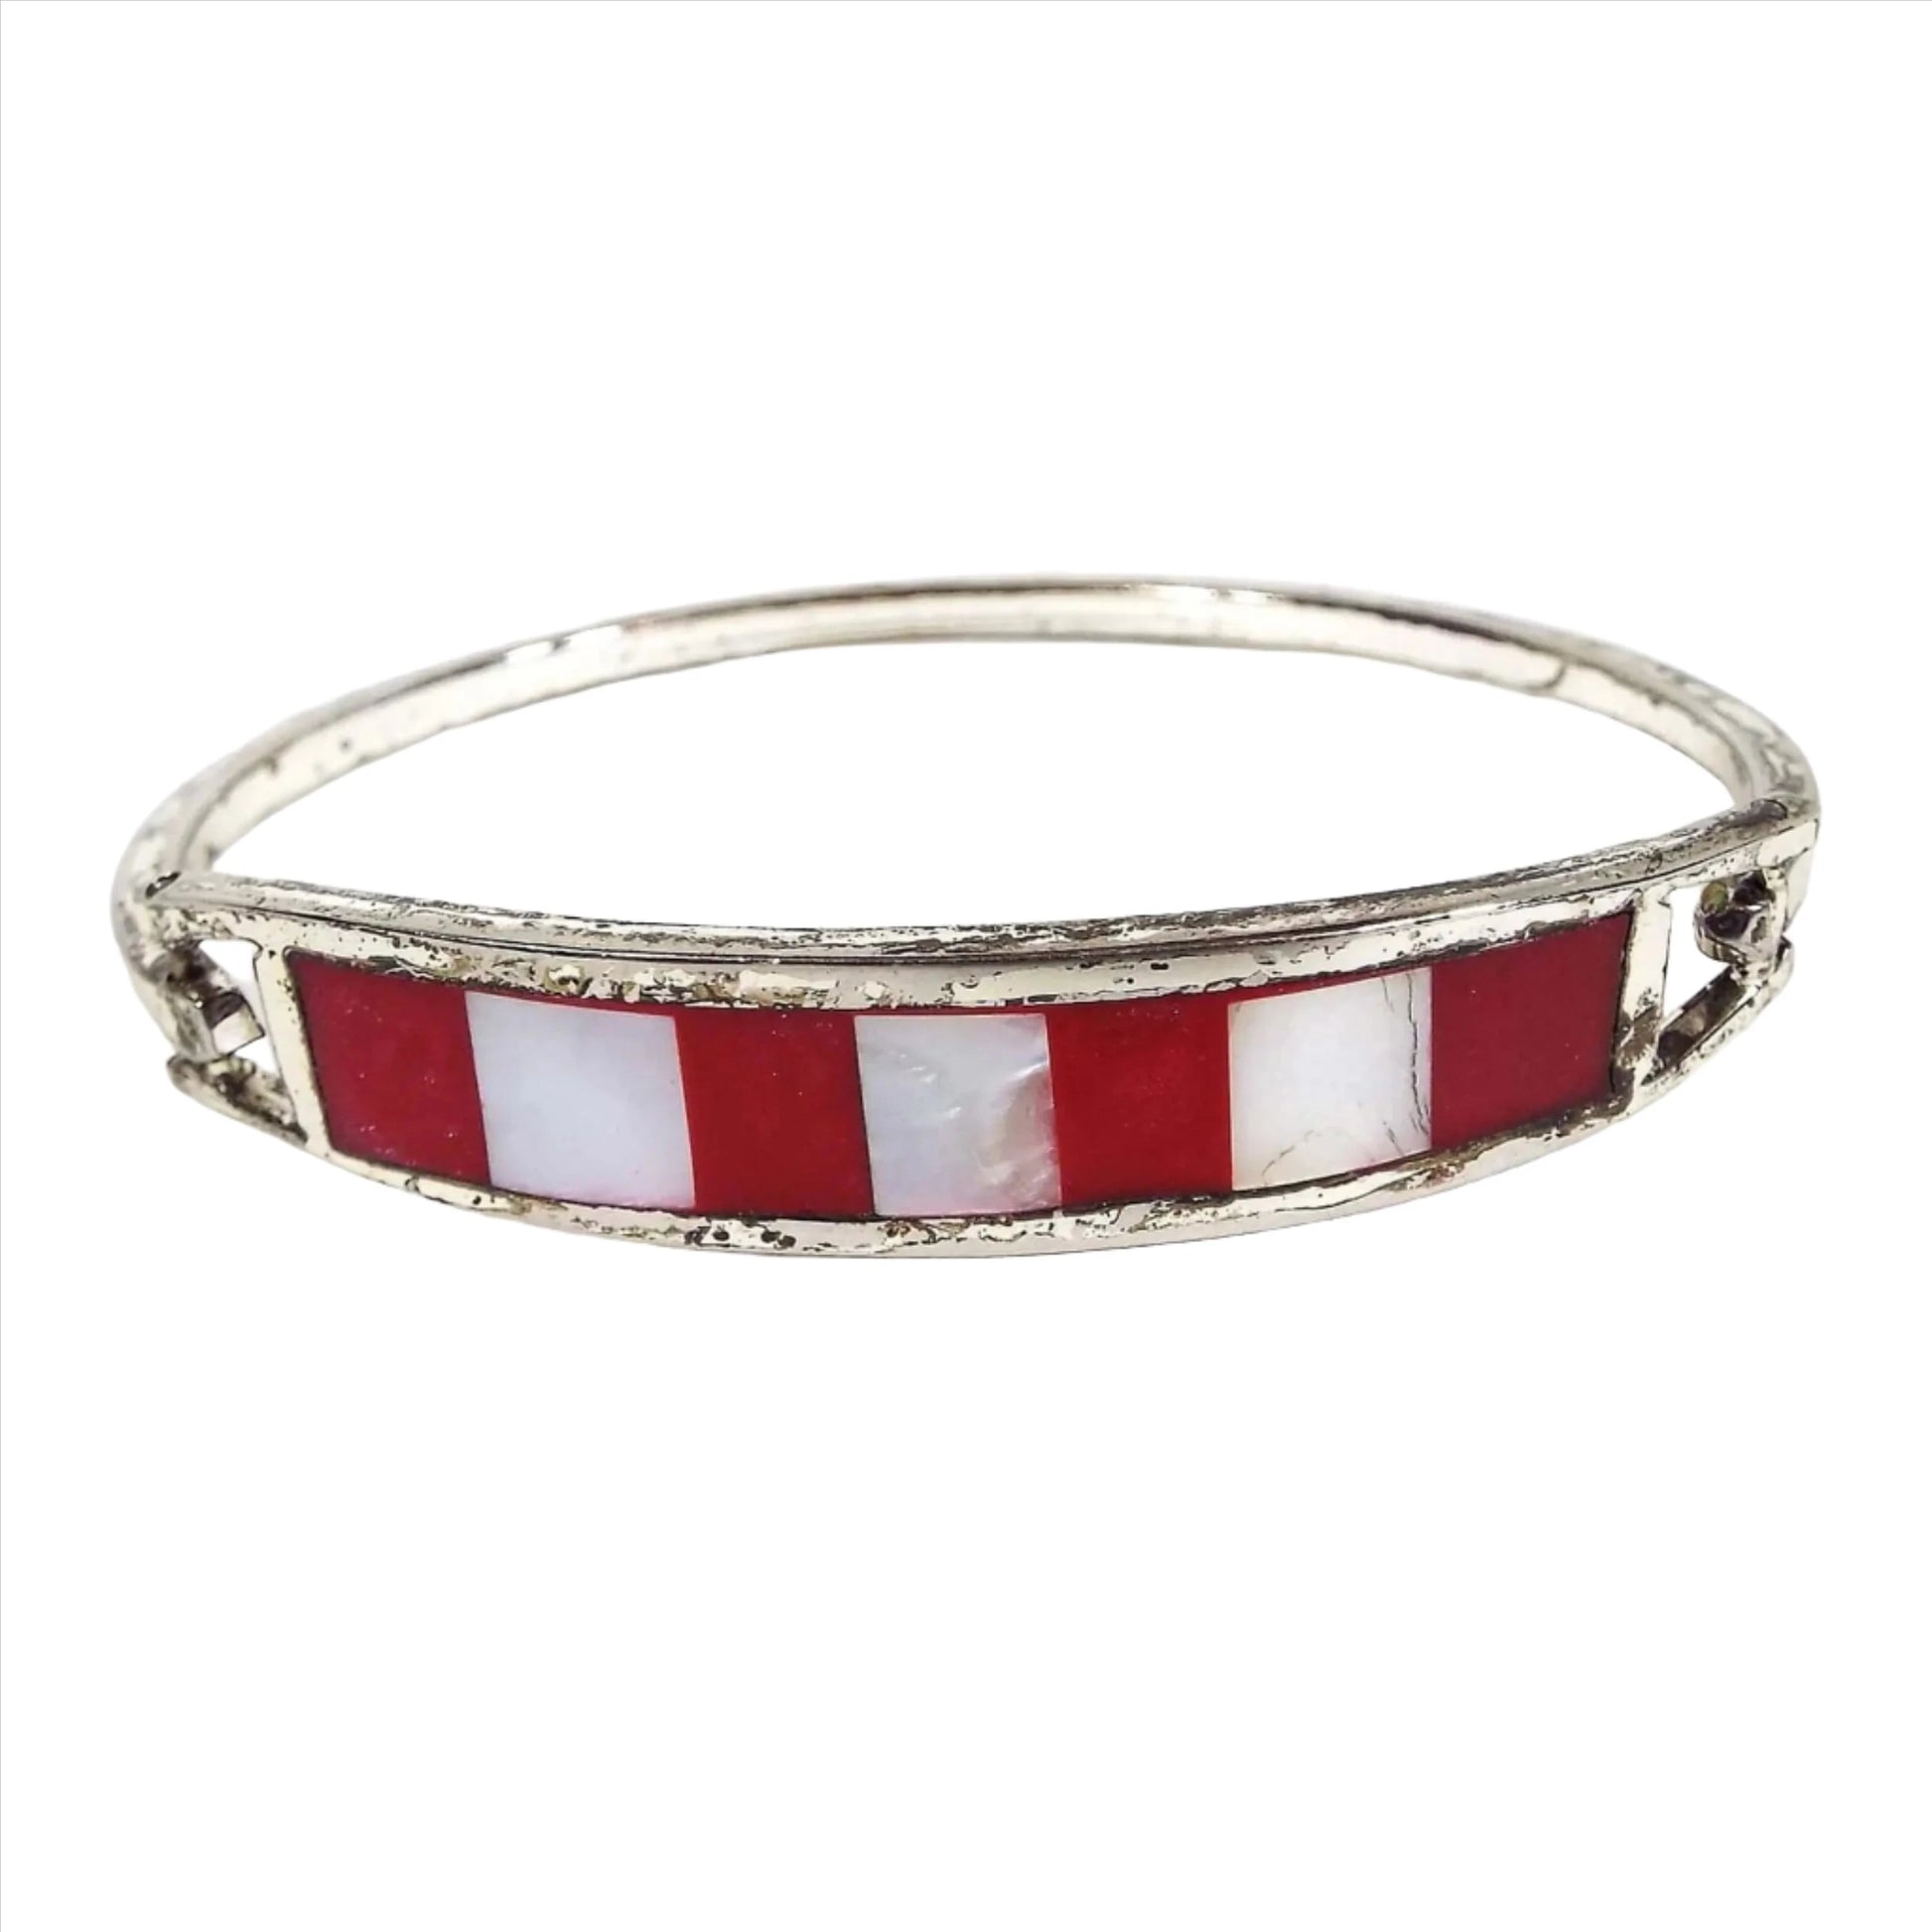 Angled front and side view of the retro vintage Mexican hinged bangle bracelet. The metal is darkened silver tone in color. The front has a curved bar with stripes of red resin enamel and pearly white inlaid mother of pearl shell. The metal band on the back is thin and squared and has a hinge on one side and a hook on the other to open and close the bangle.